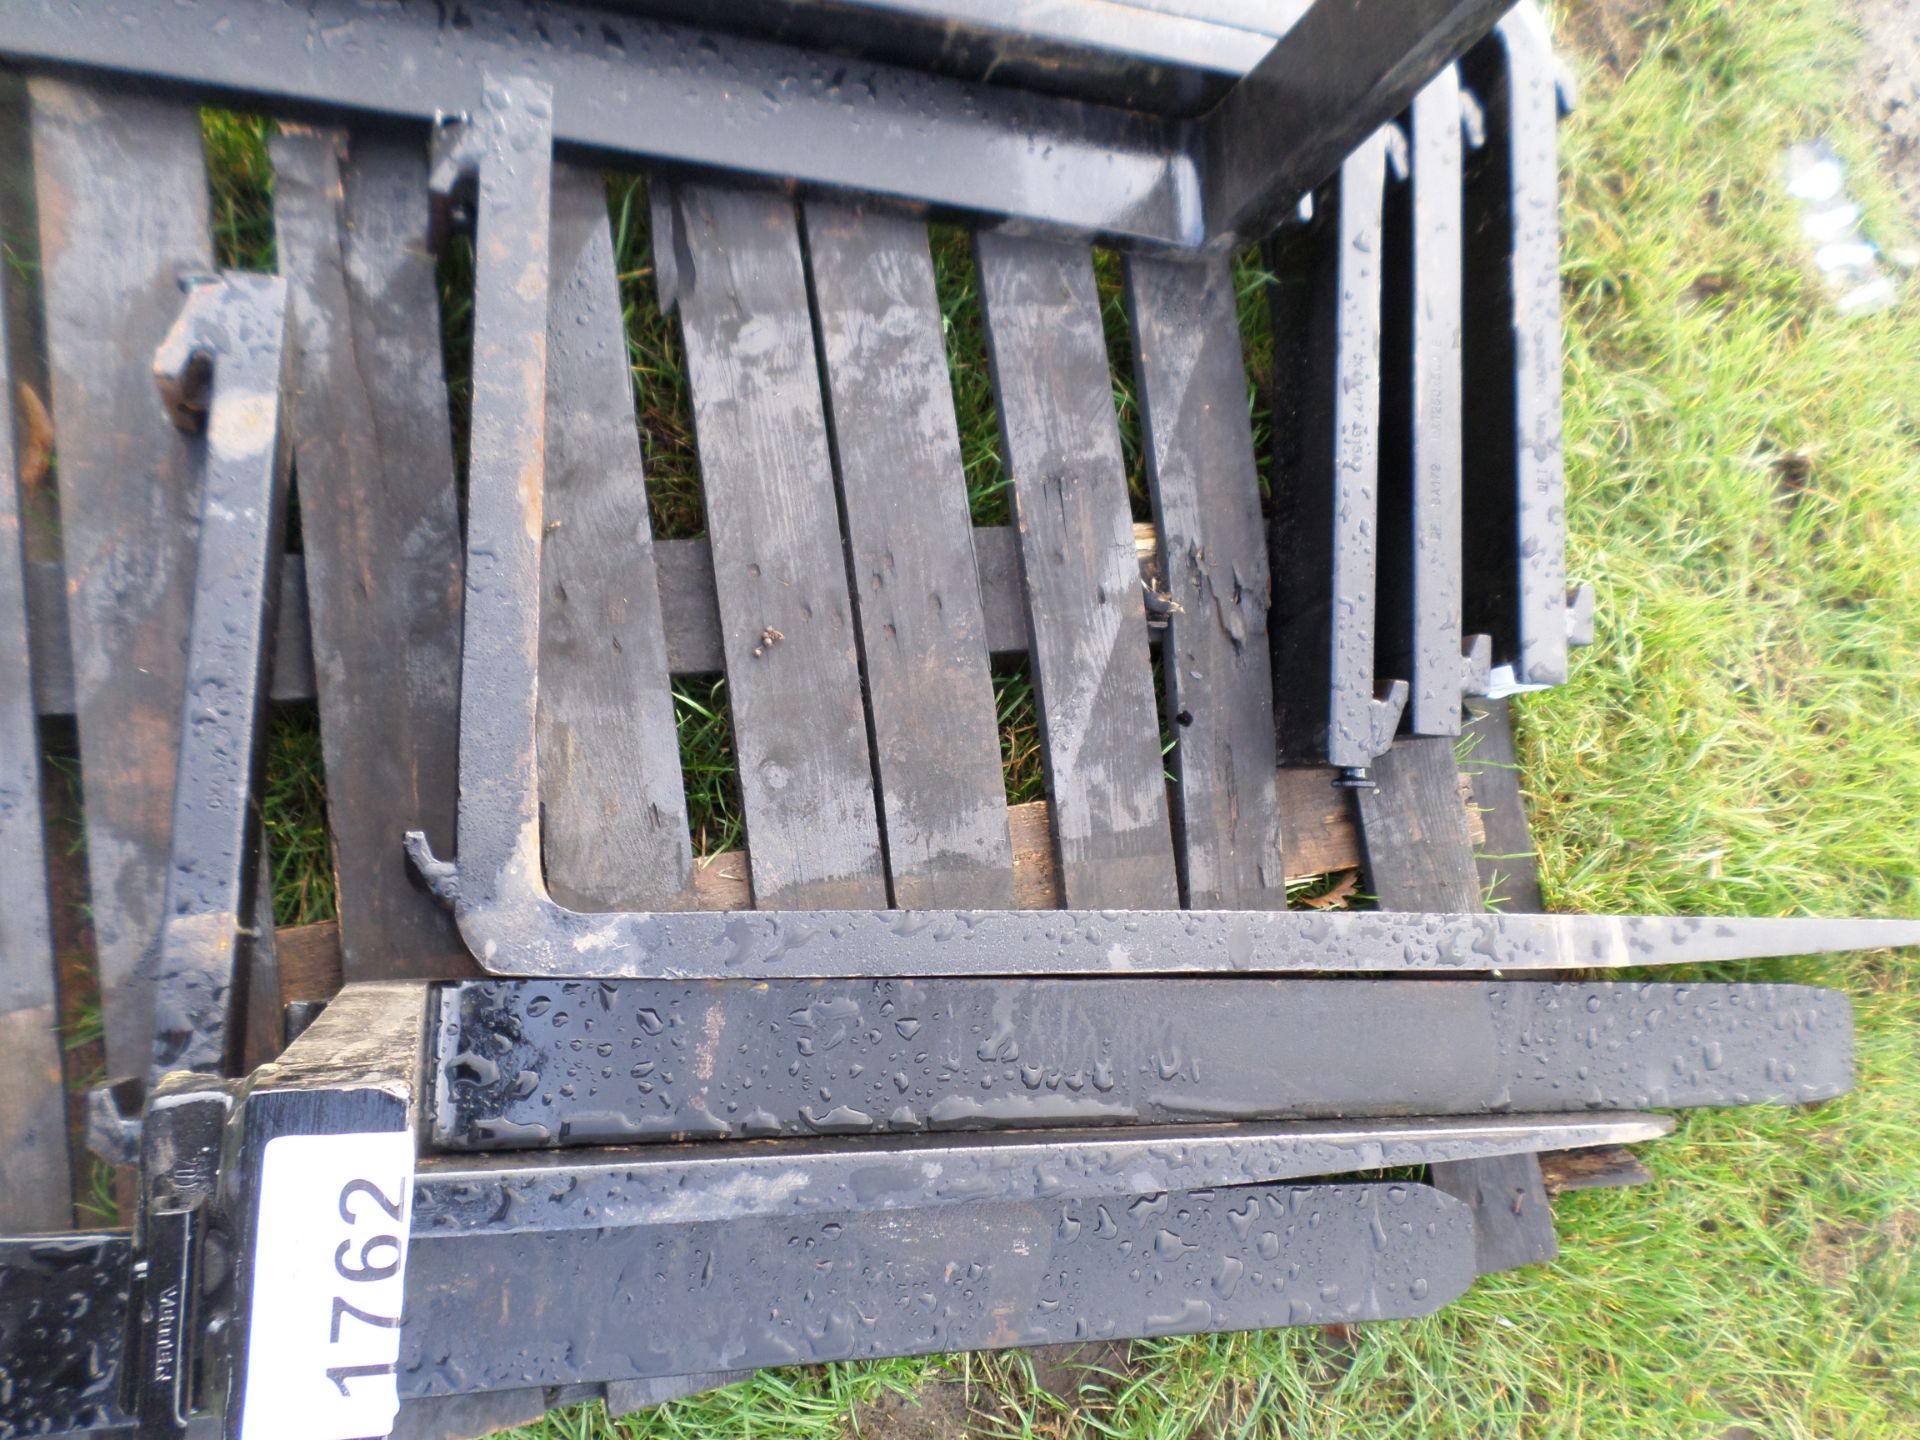 Pair of forklift tines